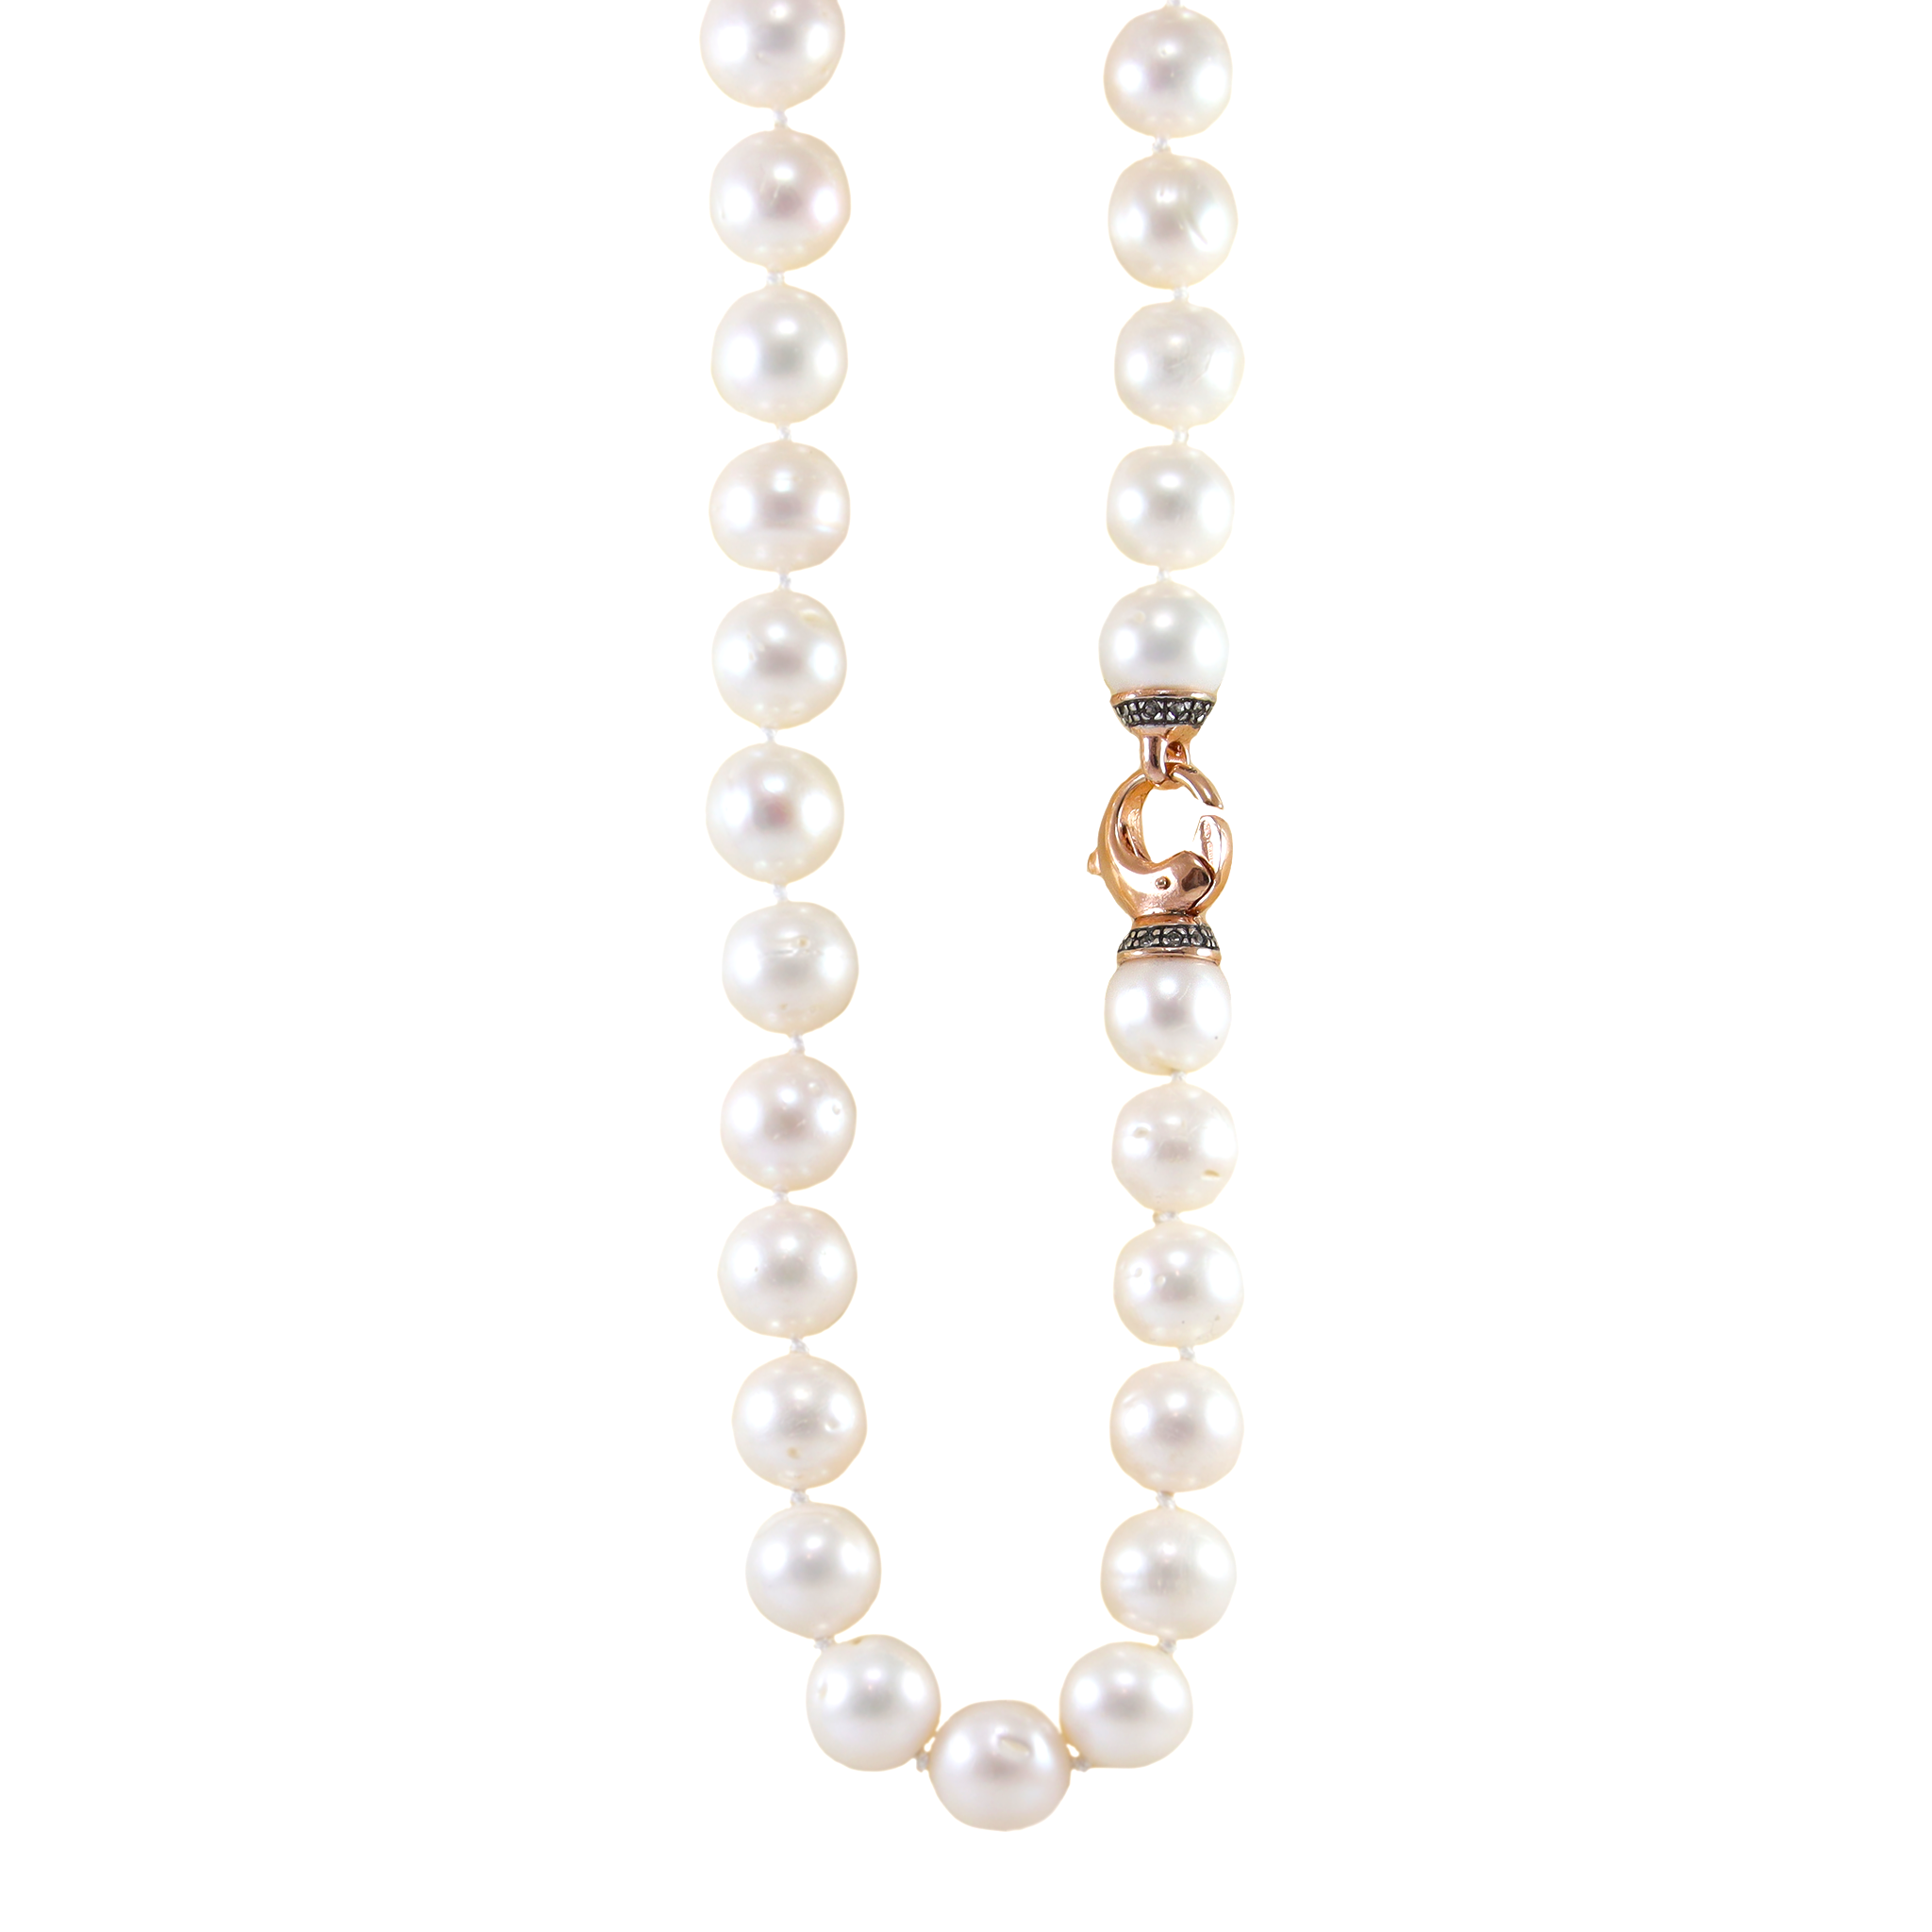 11-13mm White Pearl Necklace 19"